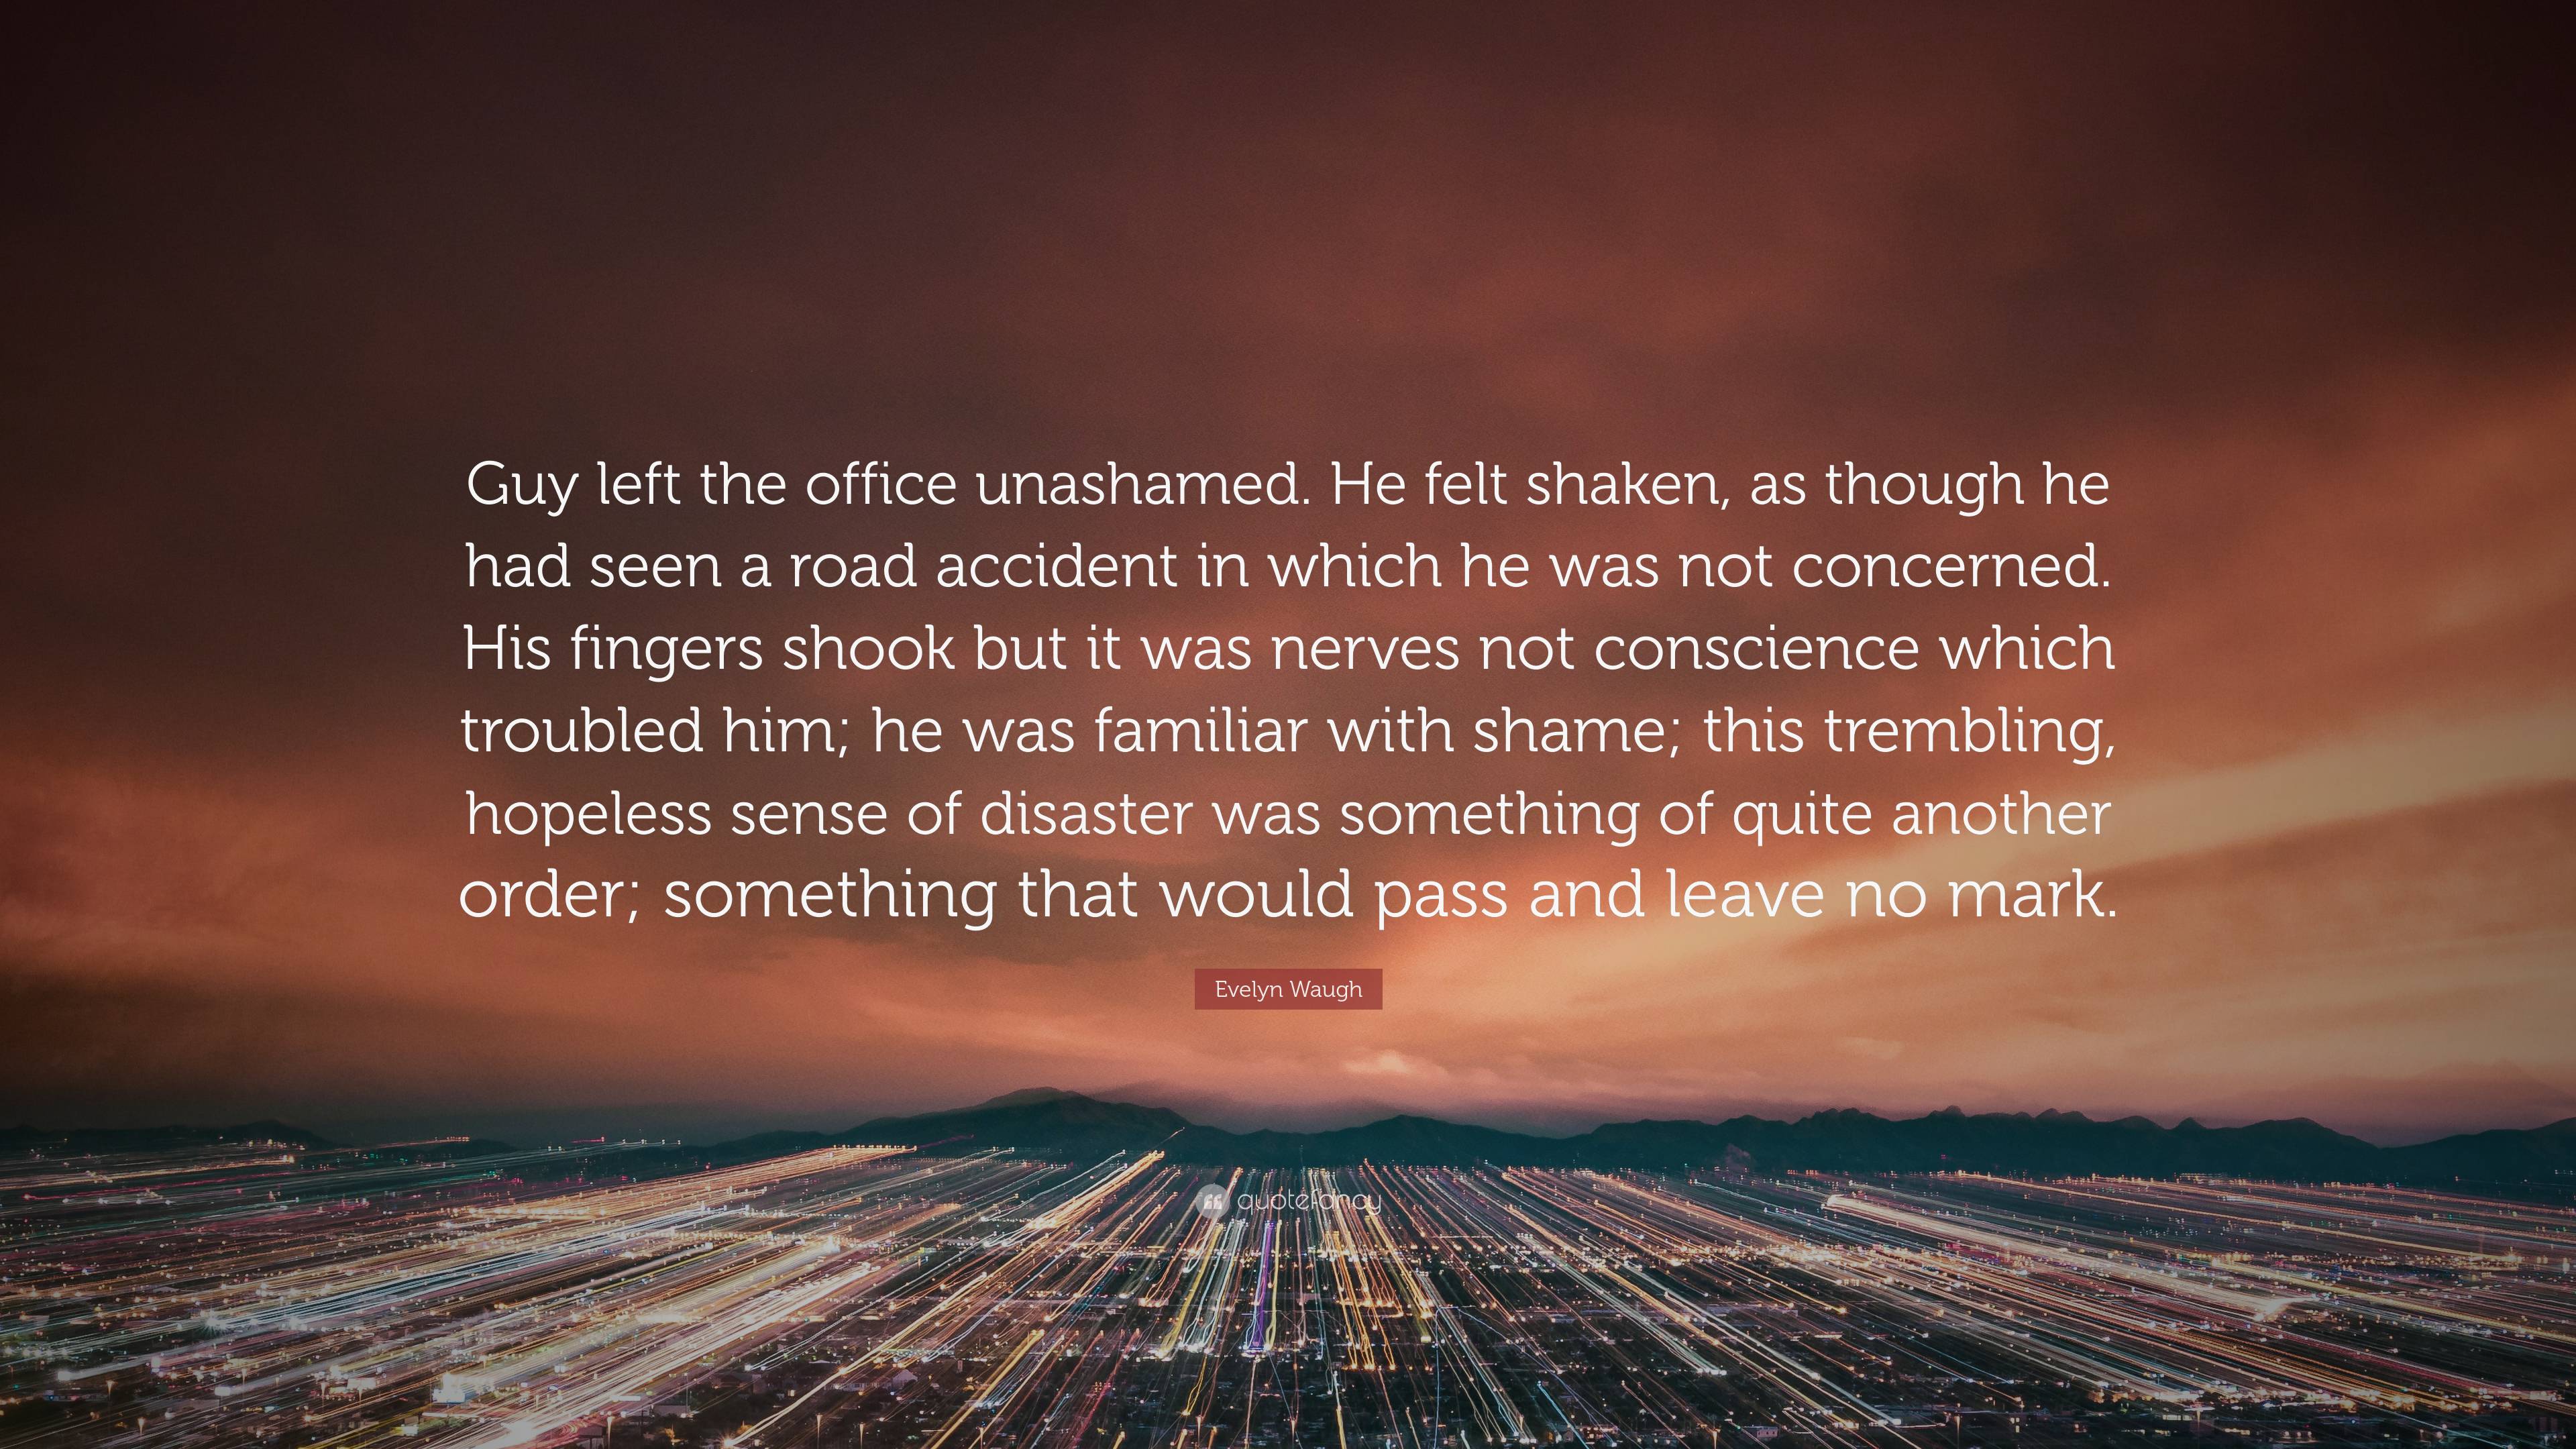 Evelyn Waugh Quote: “Guy left the office unashamed. He felt shaken, as ...